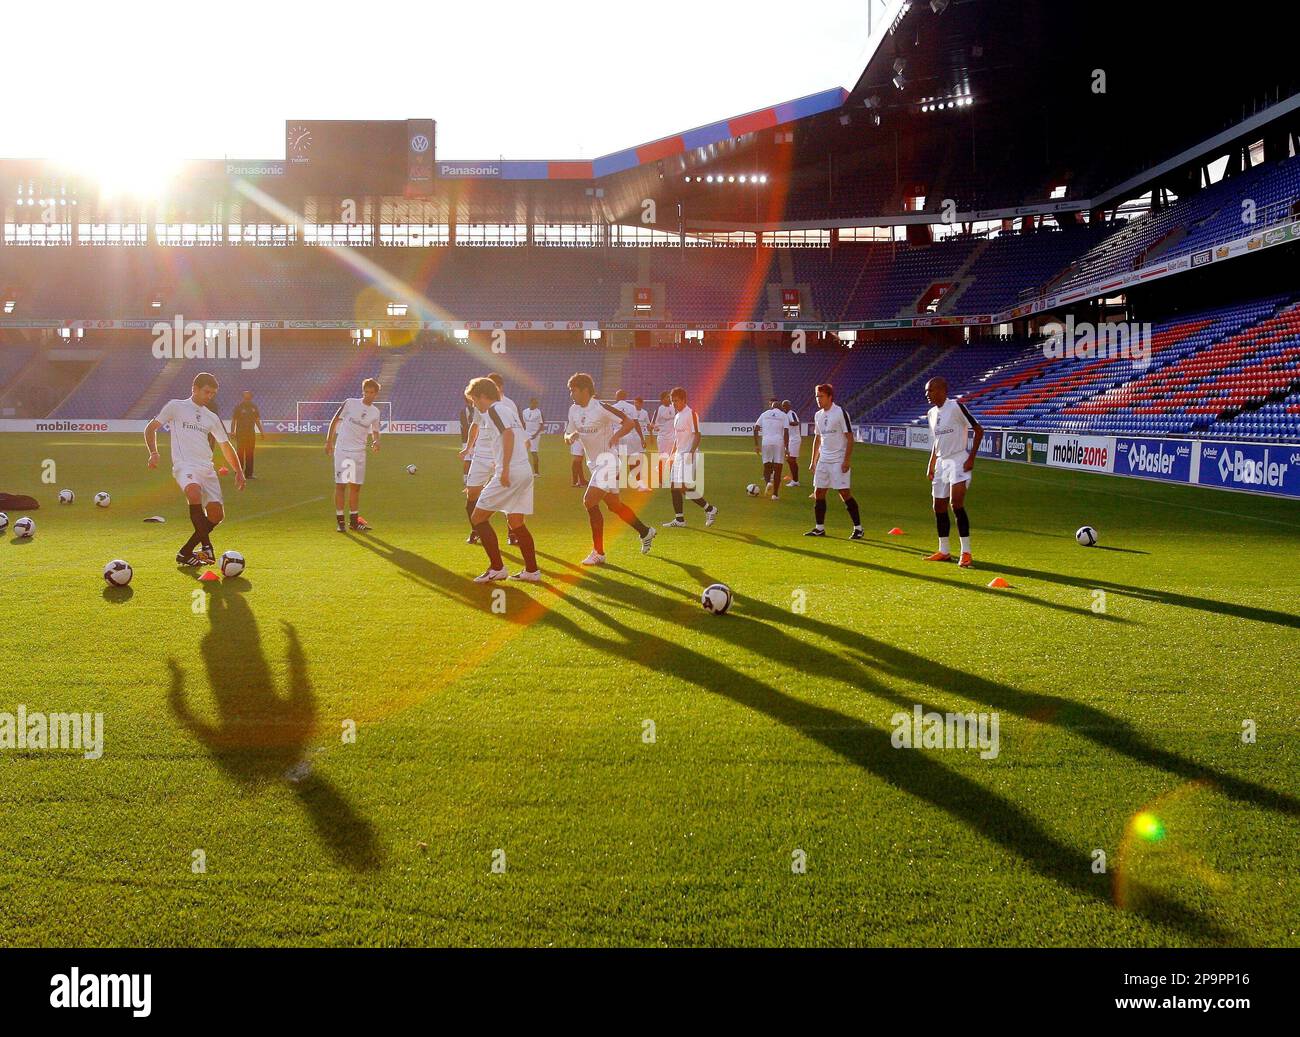 Players of Portugal's soccer club Vitoria Guimaraes, during a training  session in the St. Jakob Park Stadium in Basel, Switzerland, Tuesday, Aug.  26, 2008. Vitoria SC Guimaraes will play Switzerlands FC Basel